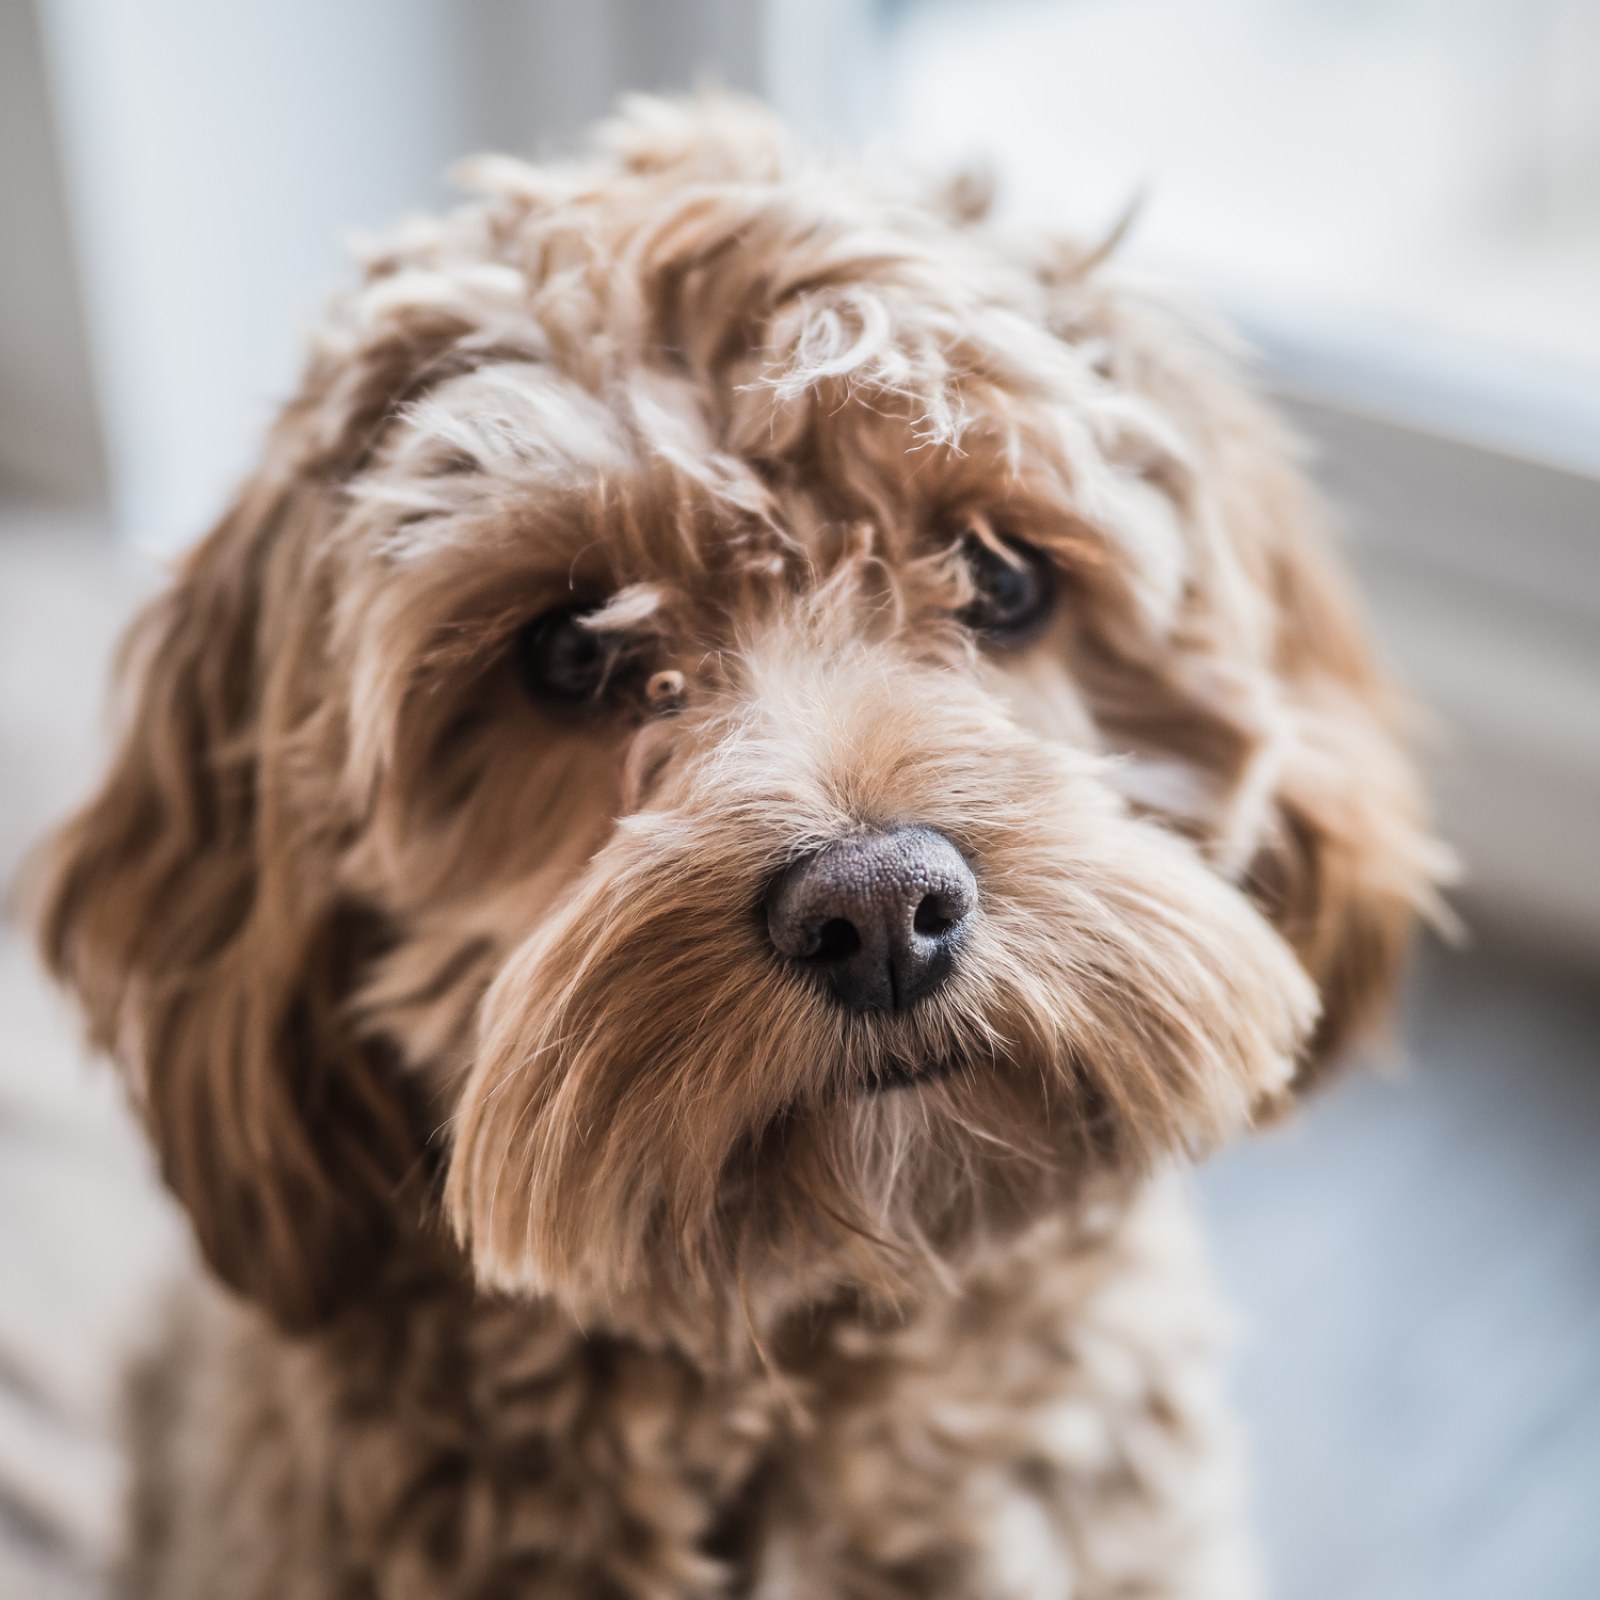 The 10 'Naughtiest' Dog Breeds, According to Owners